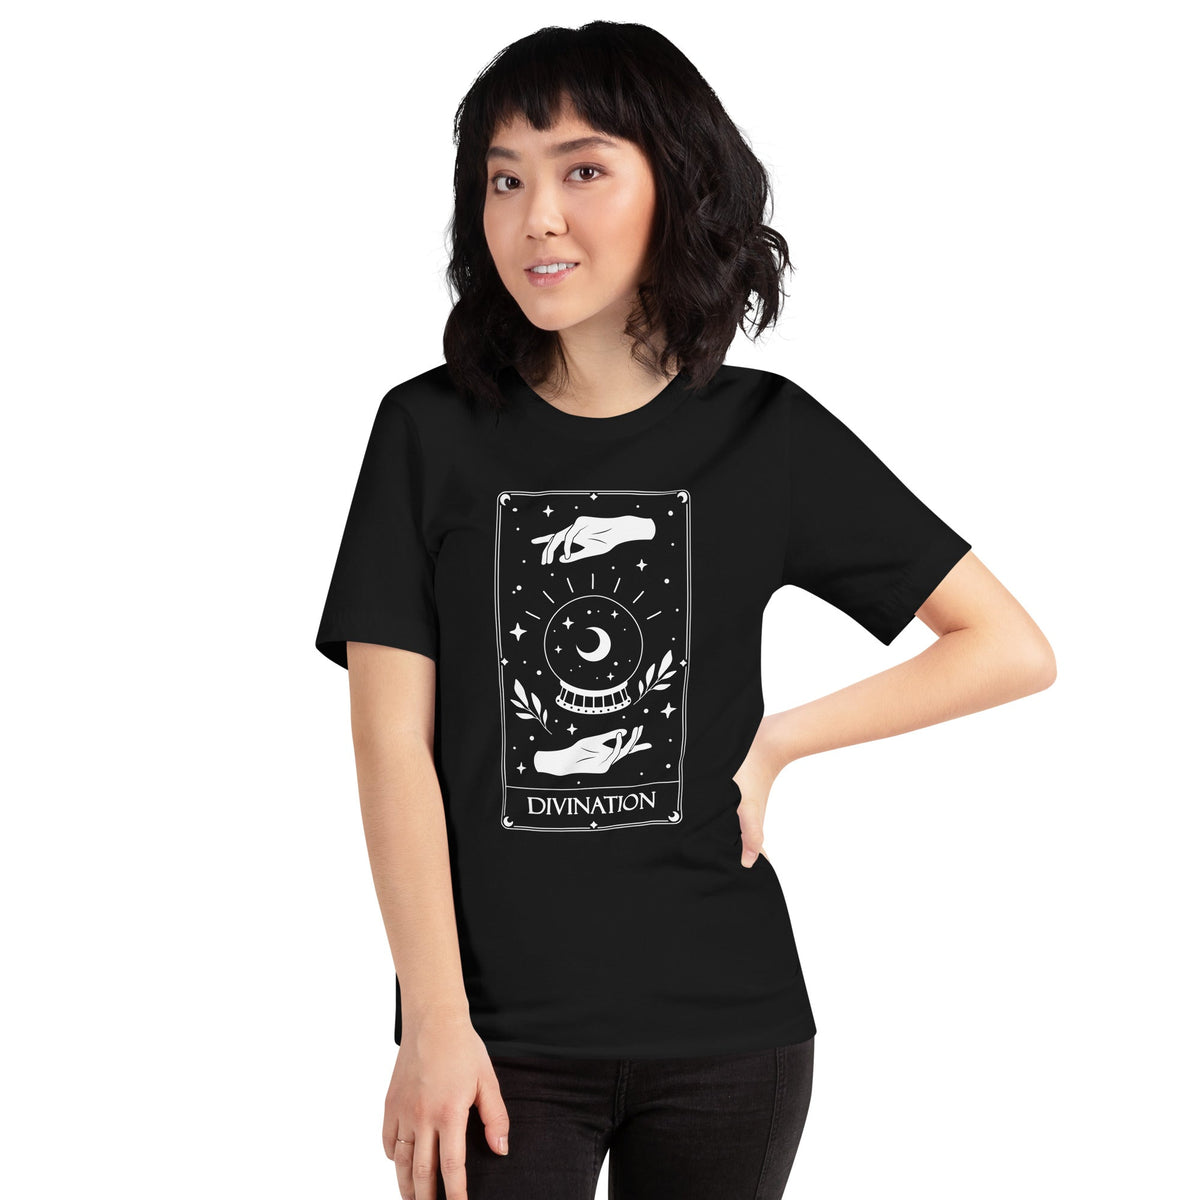 Divination Tarot Card Shirt with hands around a crystal ball containing a crescent moon and &quot;divination&quot; on the bottom